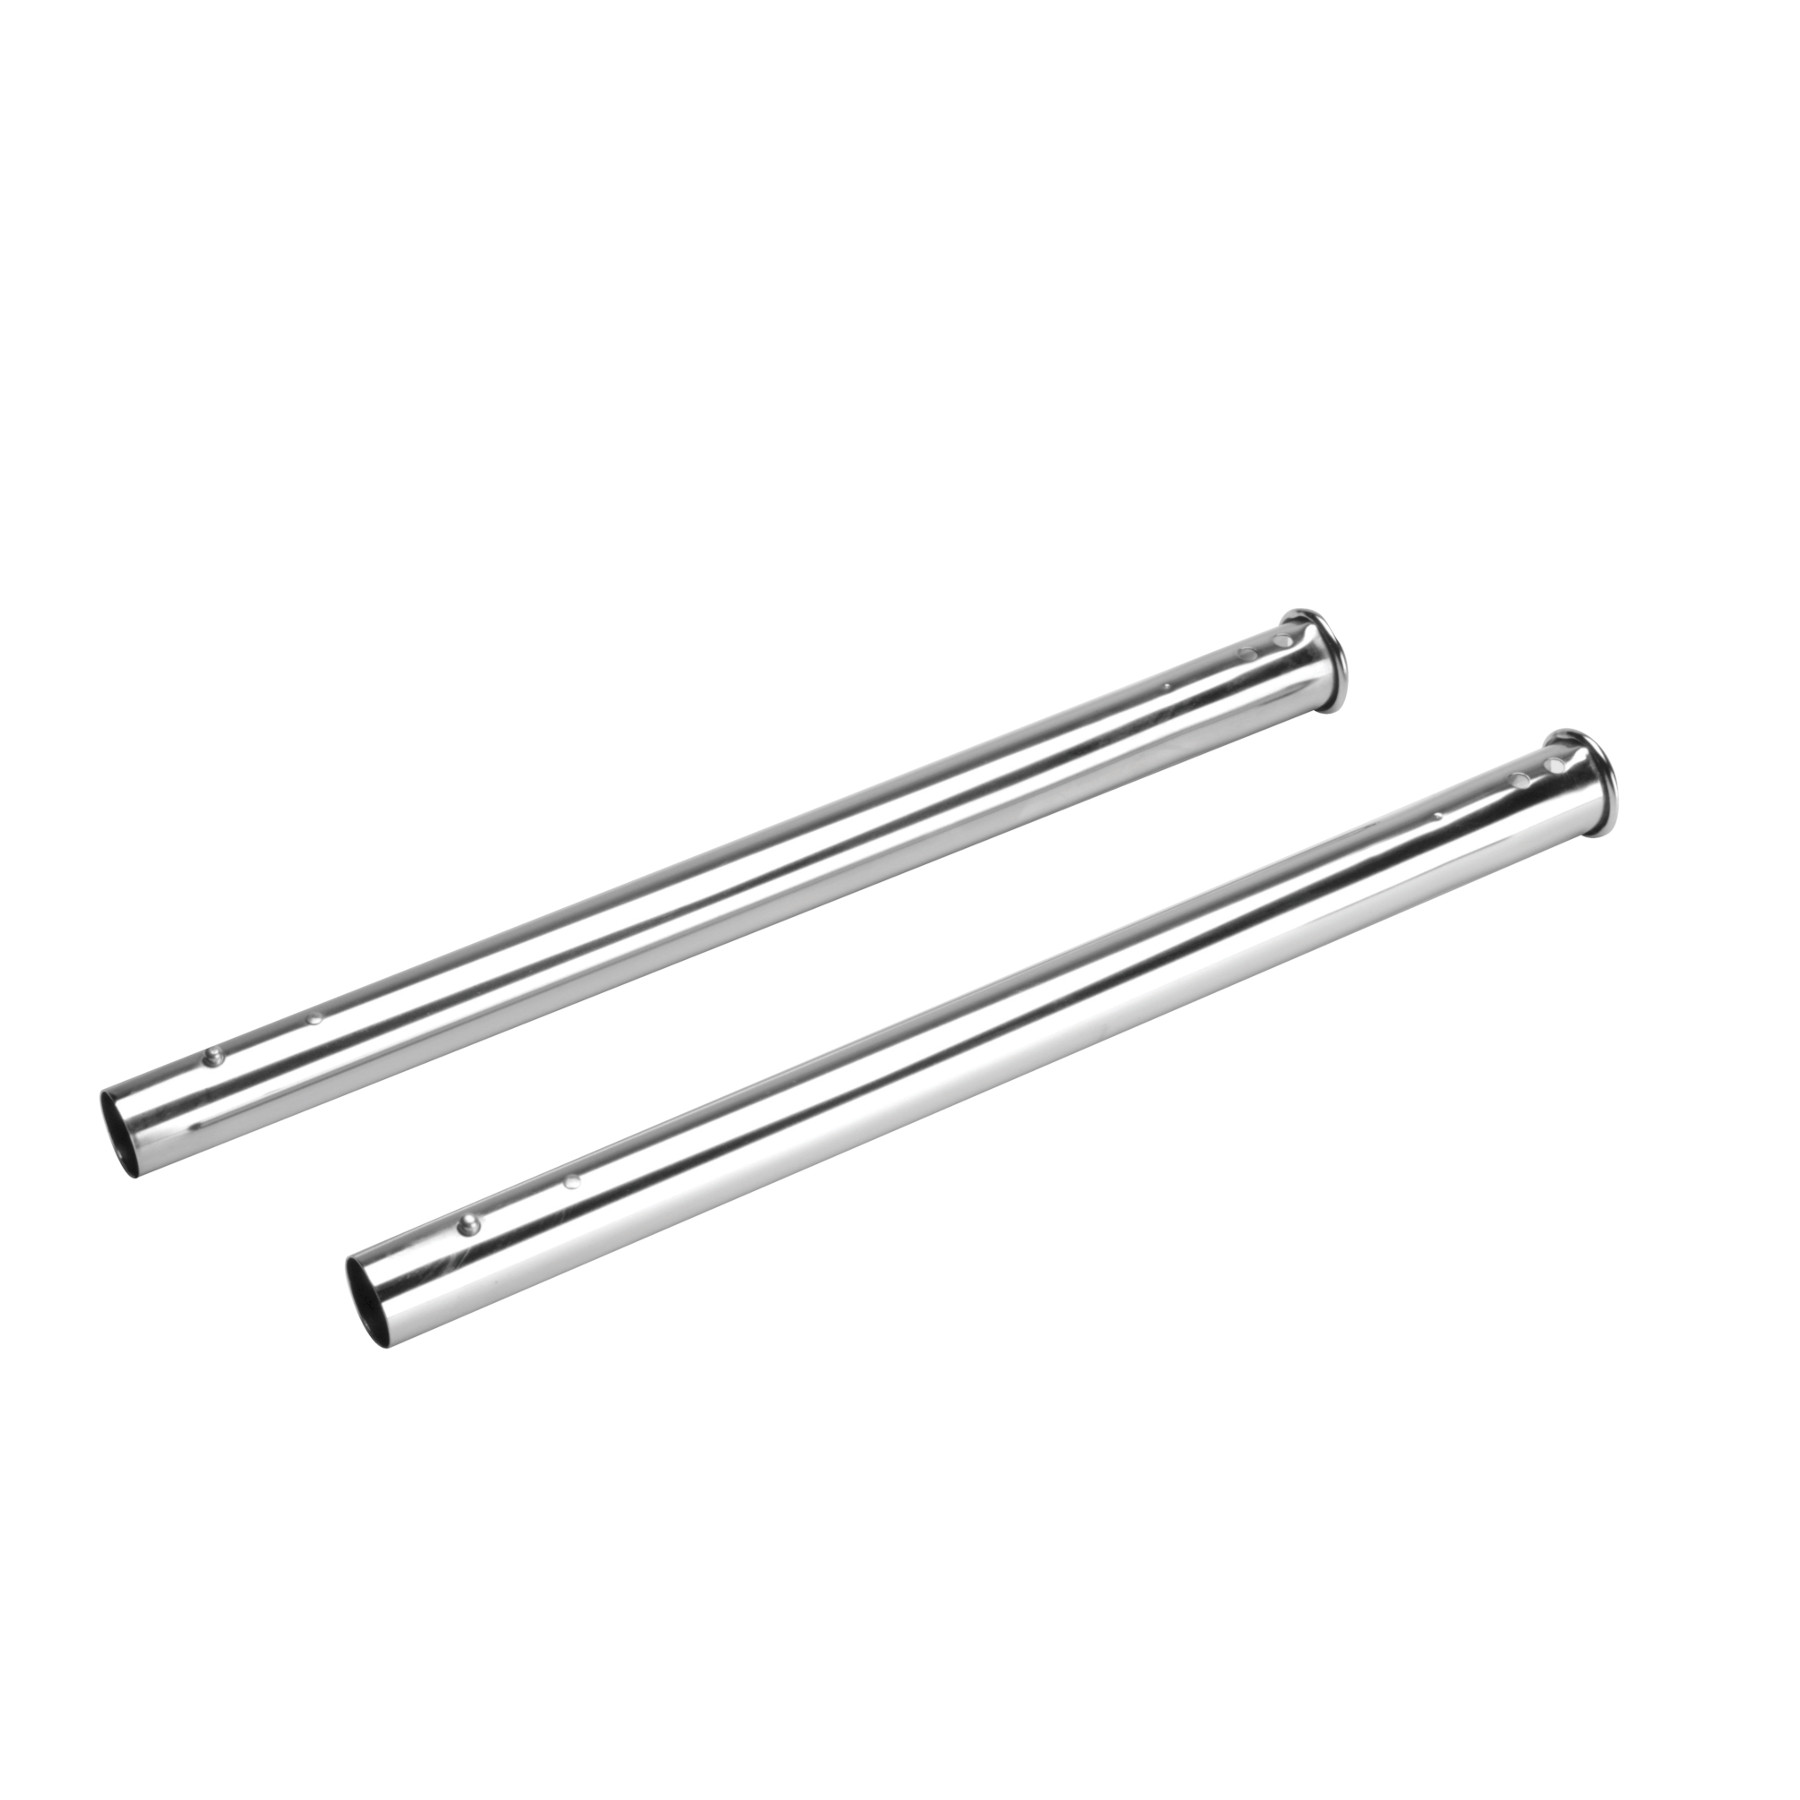 Button Lock Wands for Central Vacuums, with Plated Chrome Finish